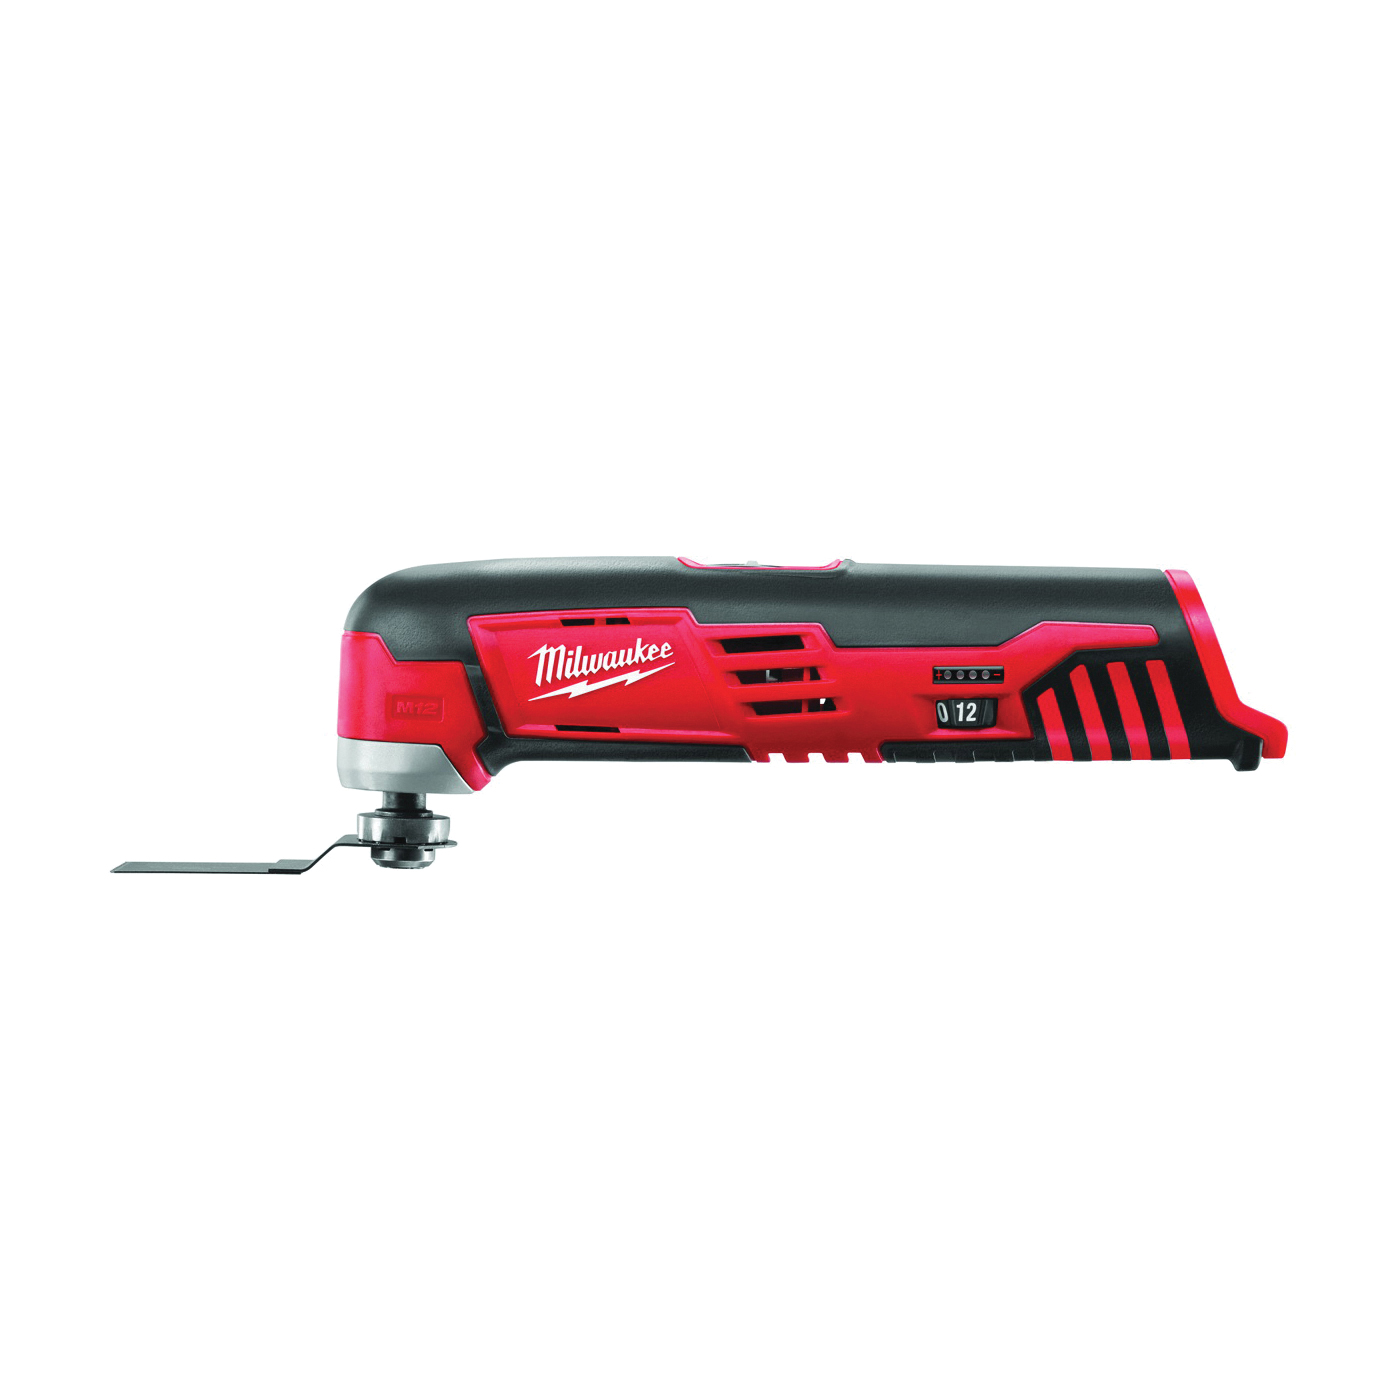 2426-20 Multi-Tool, Tool Only, 12 V, 1.4 Ah, 5000 to 20,000 opm, Variable Speed Control